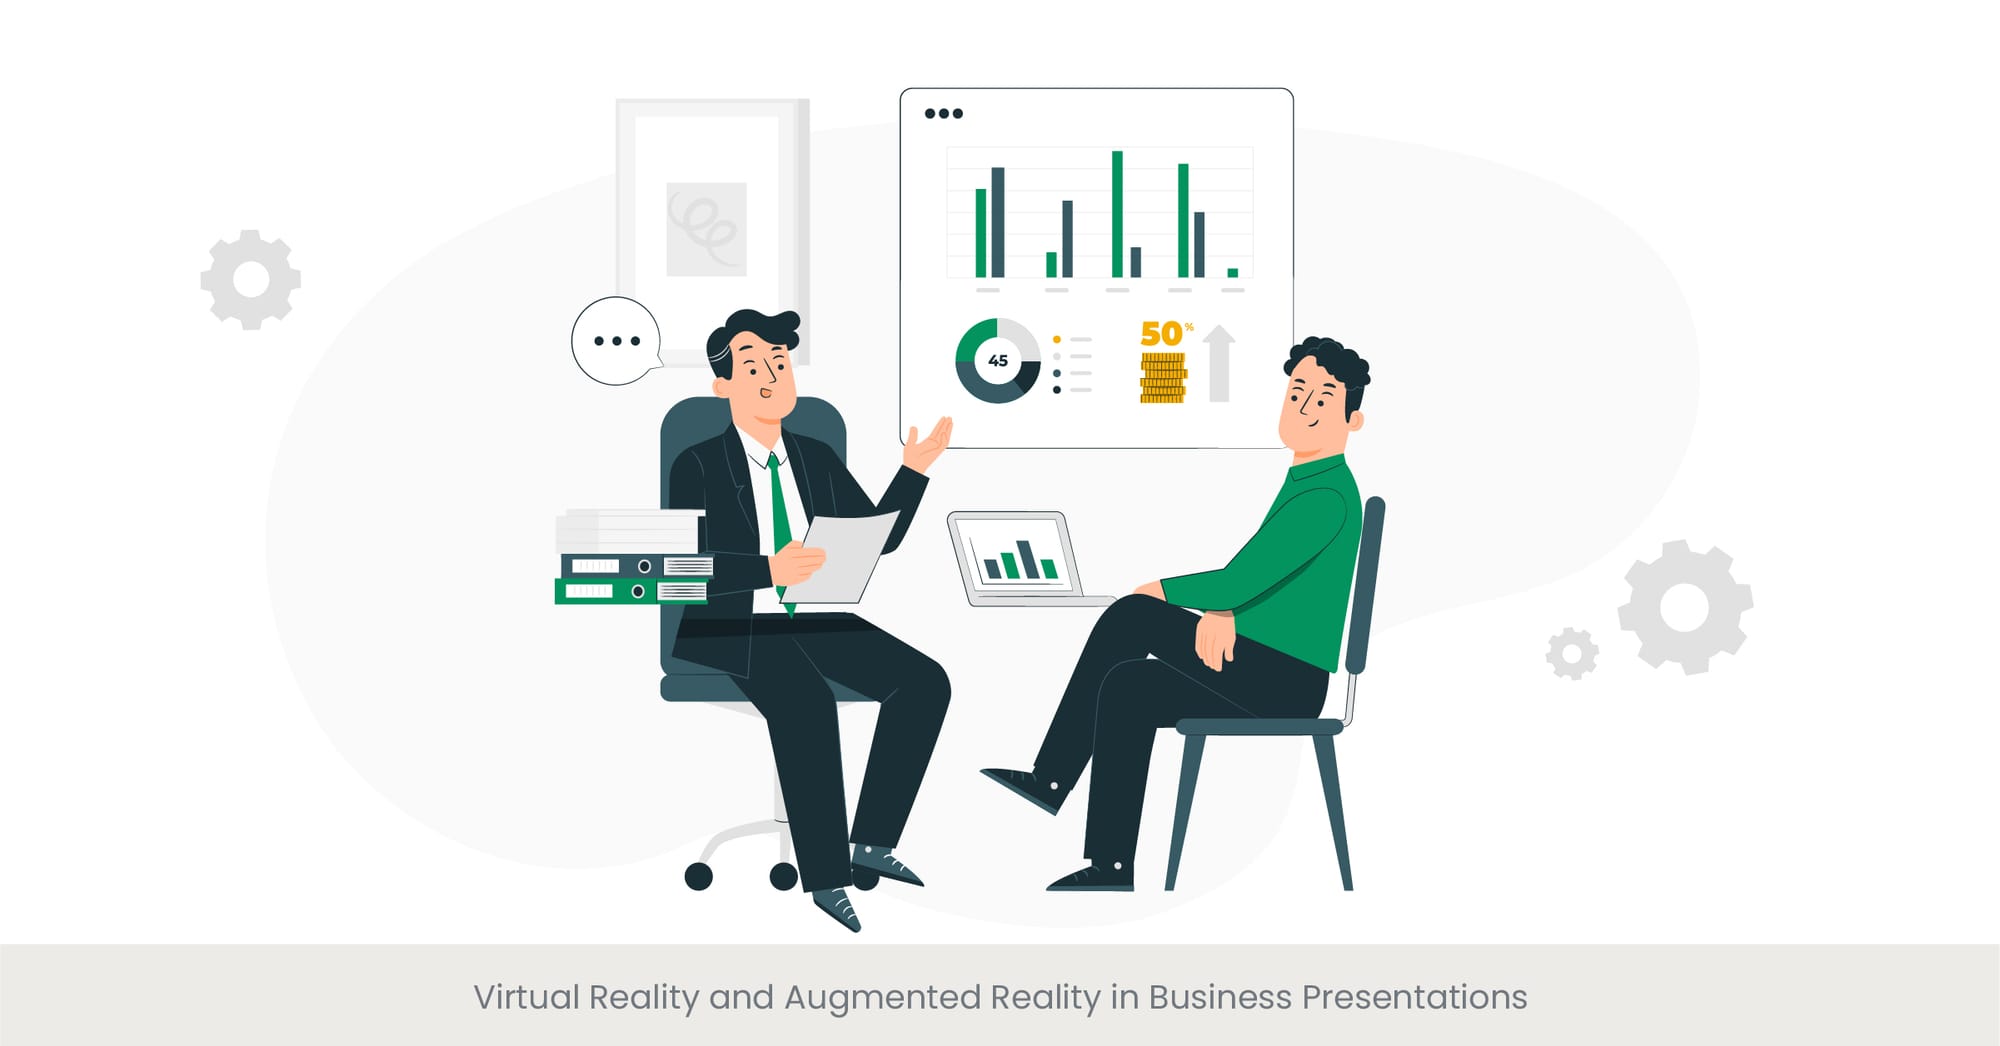 Virtual Reality and Augmented Reality in Business Presentations